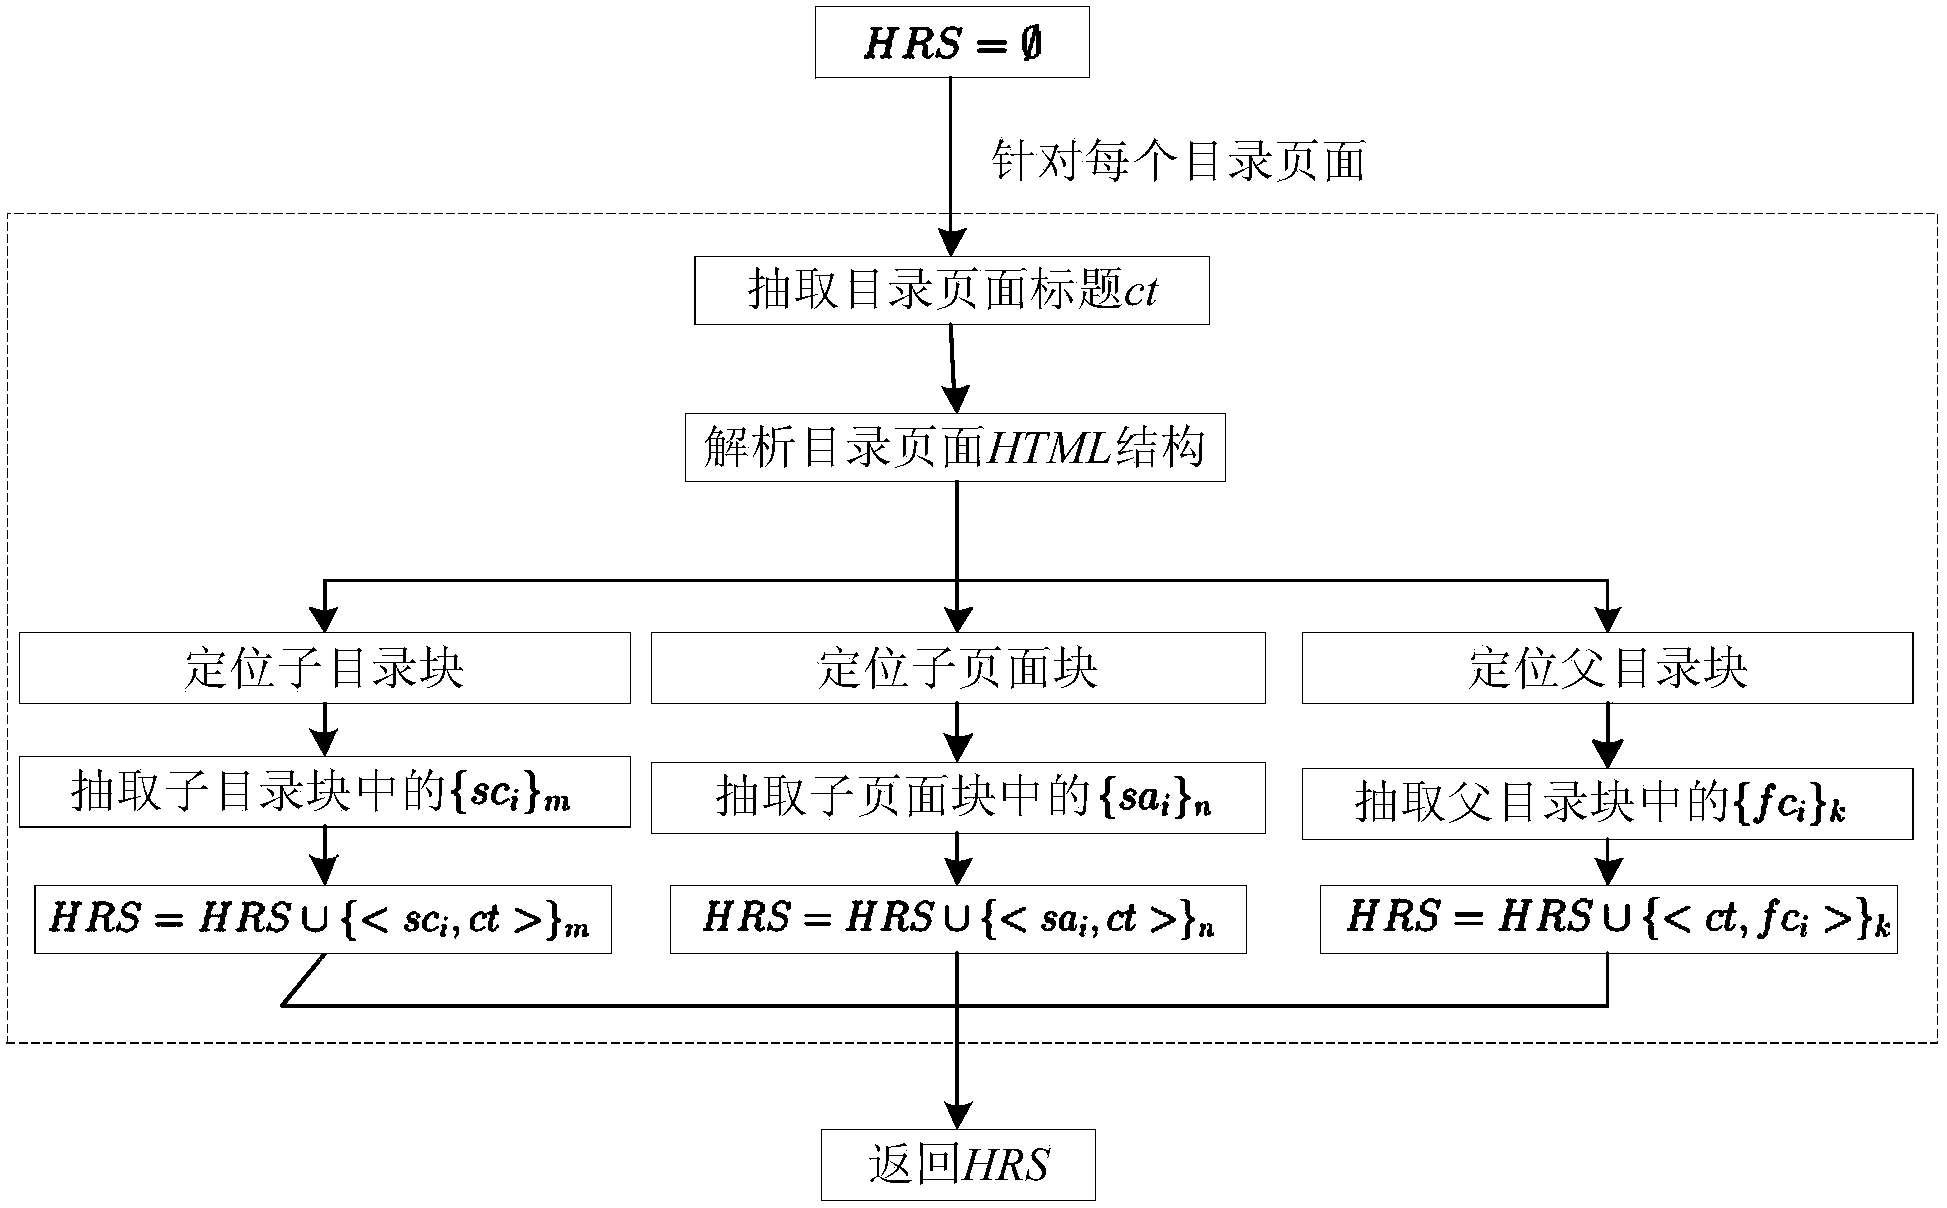 Method for automatically building classification tree from semi-structured data of Wikipedia